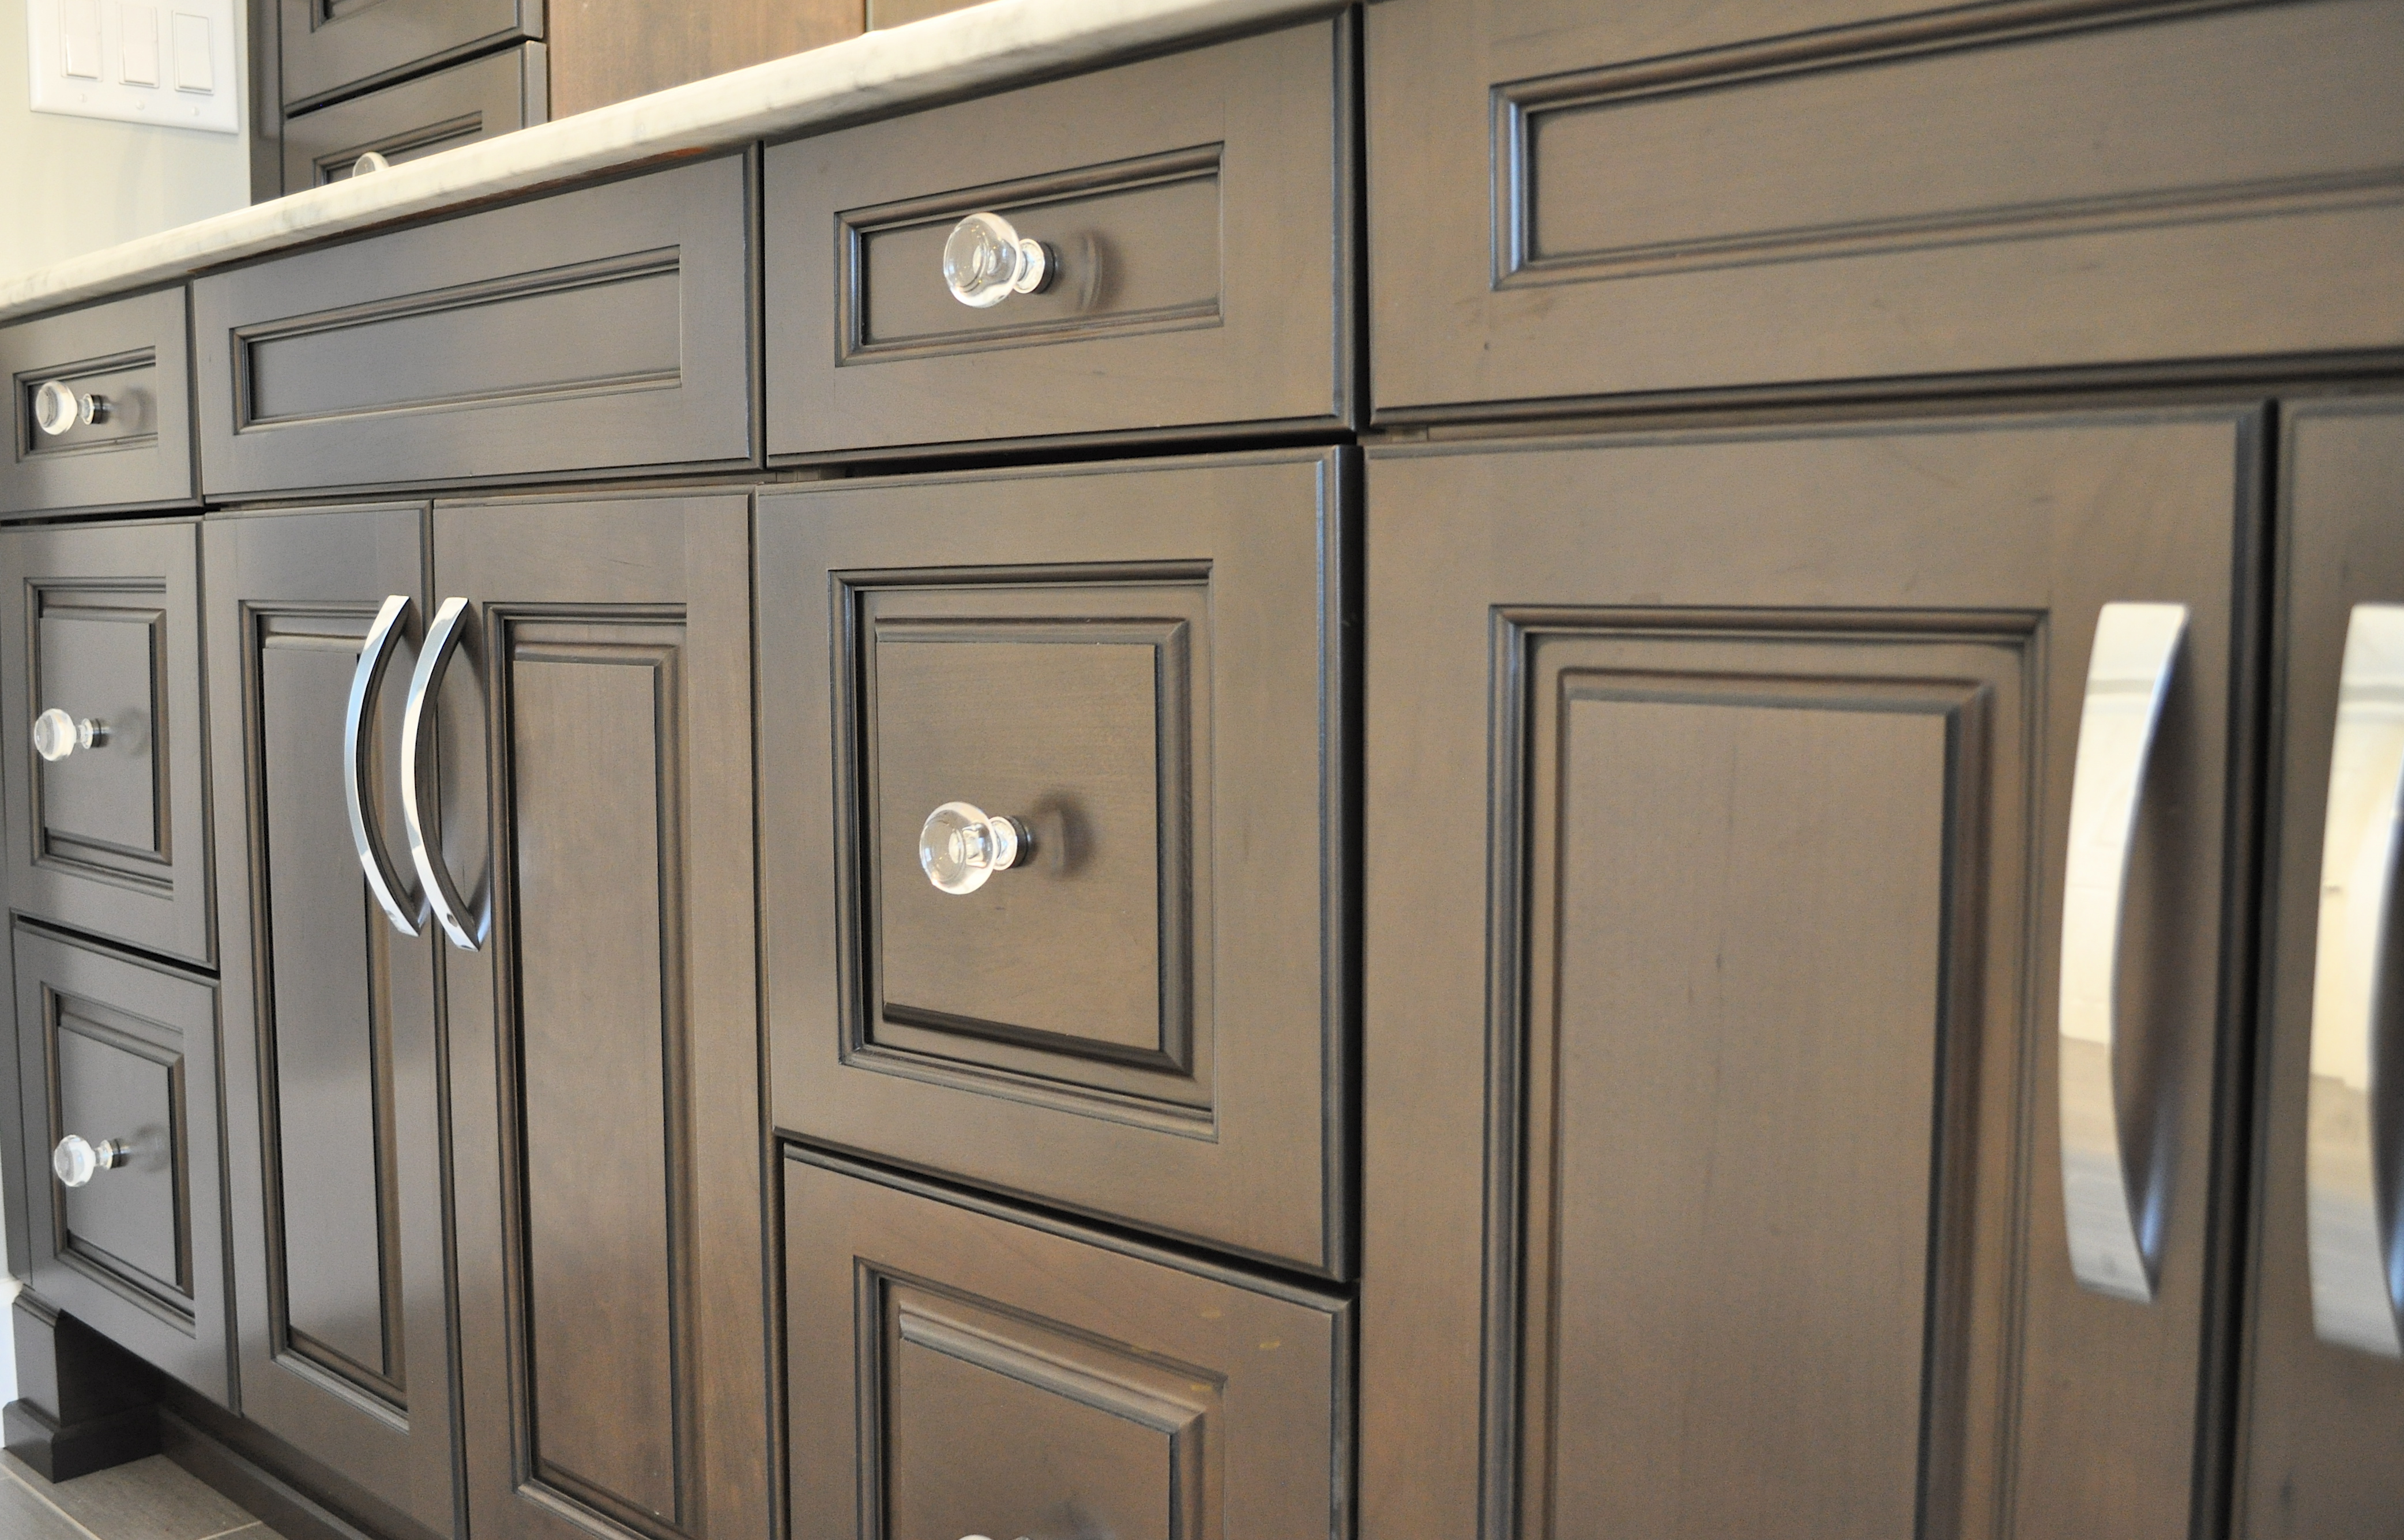 Dark Kitchen Cabinets With Knobs Quicuacom